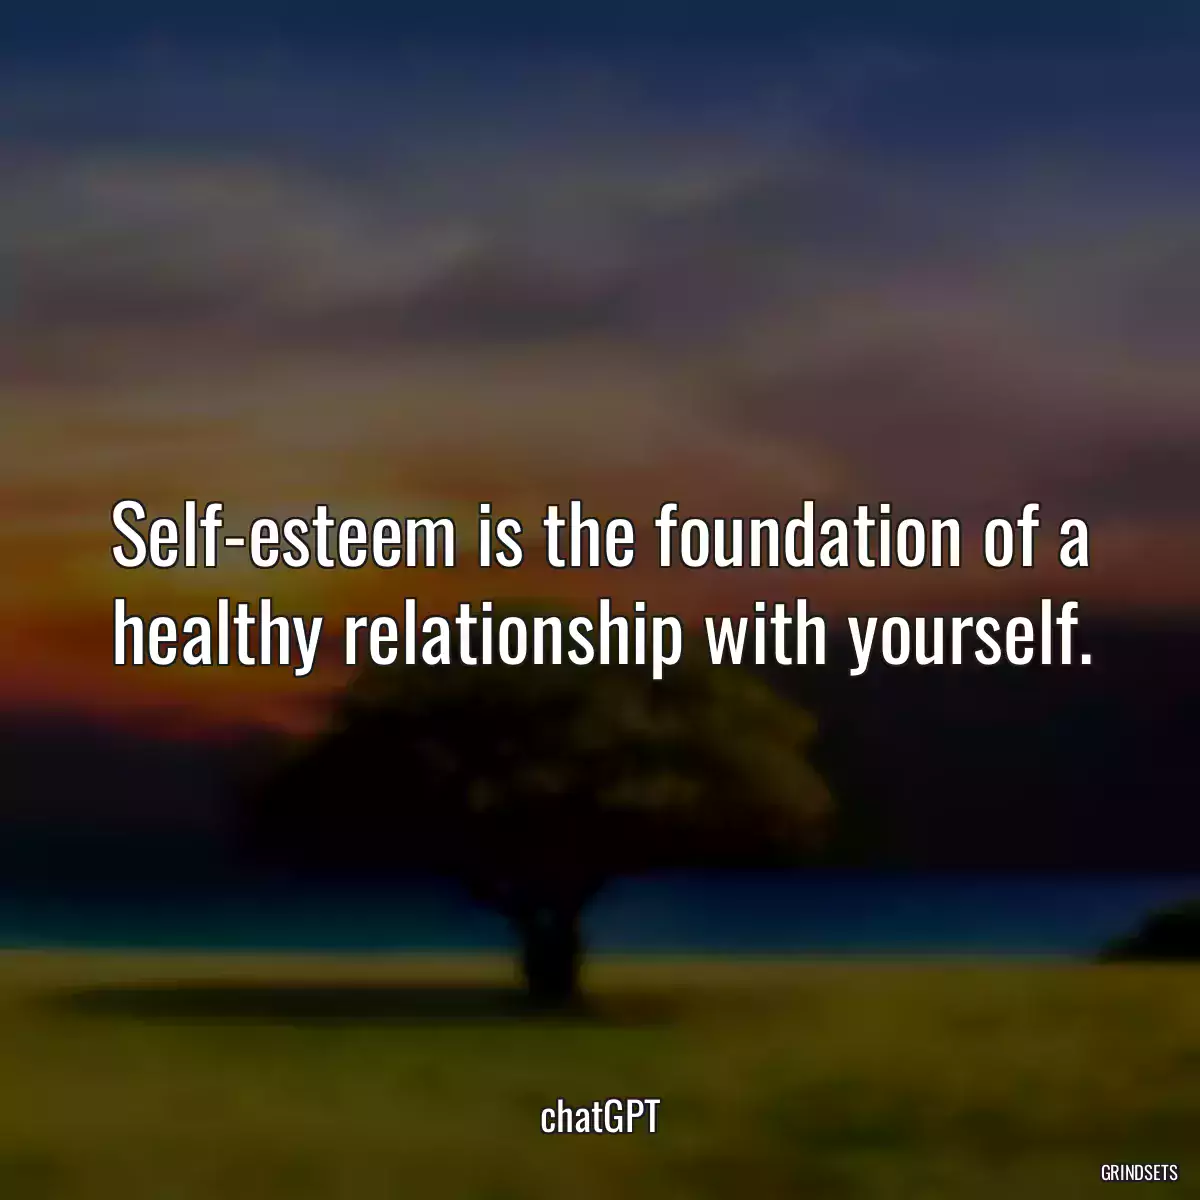 Self-esteem is the foundation of a healthy relationship with yourself.